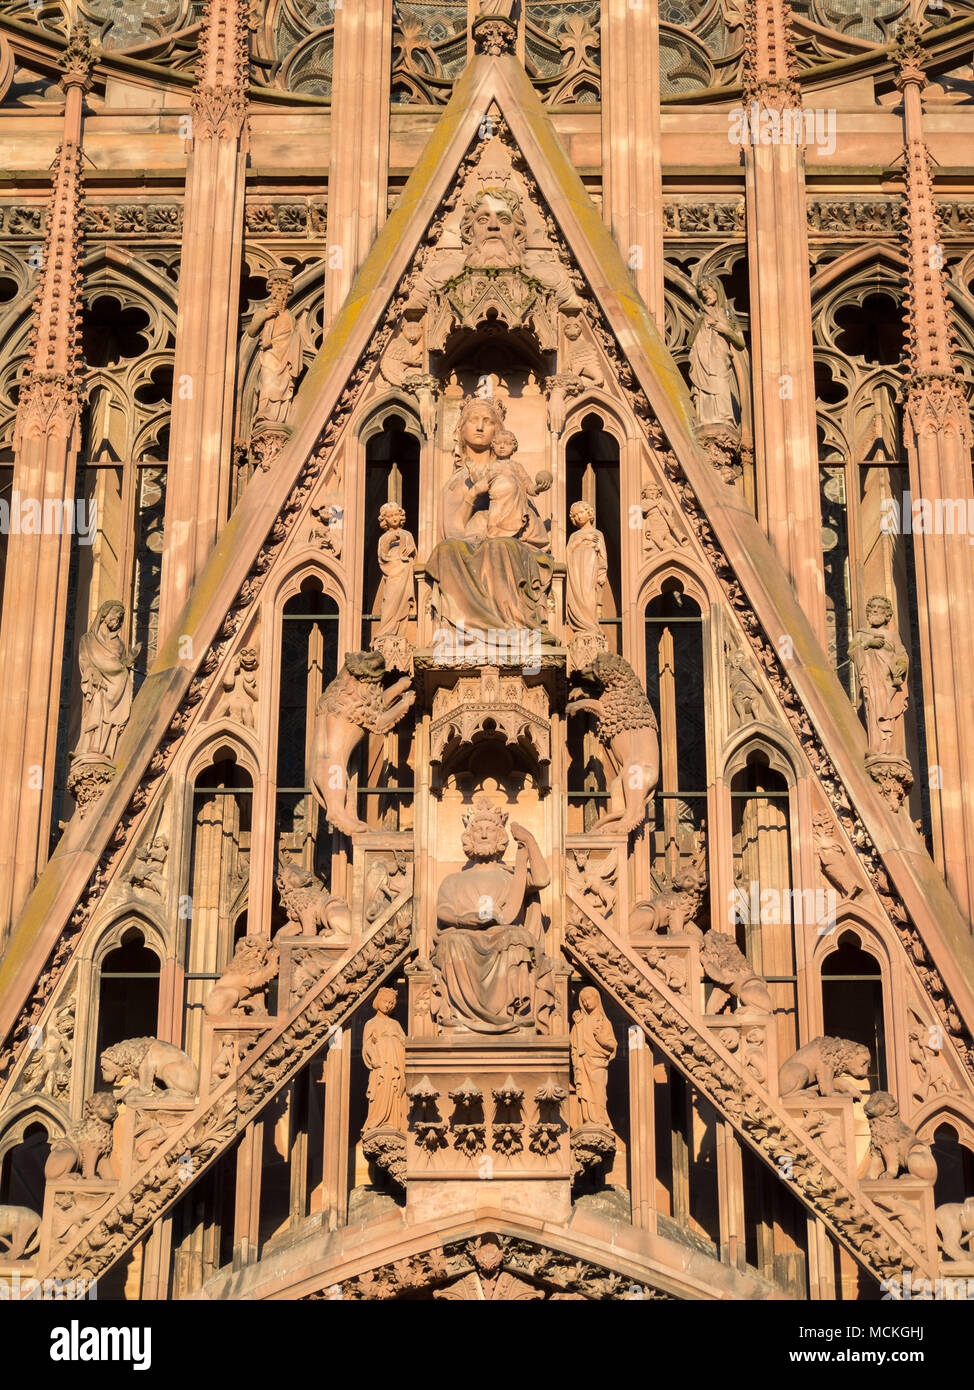 Details of the west facade of the Cathedral of Our Lady of Strasbourg Stock Photo